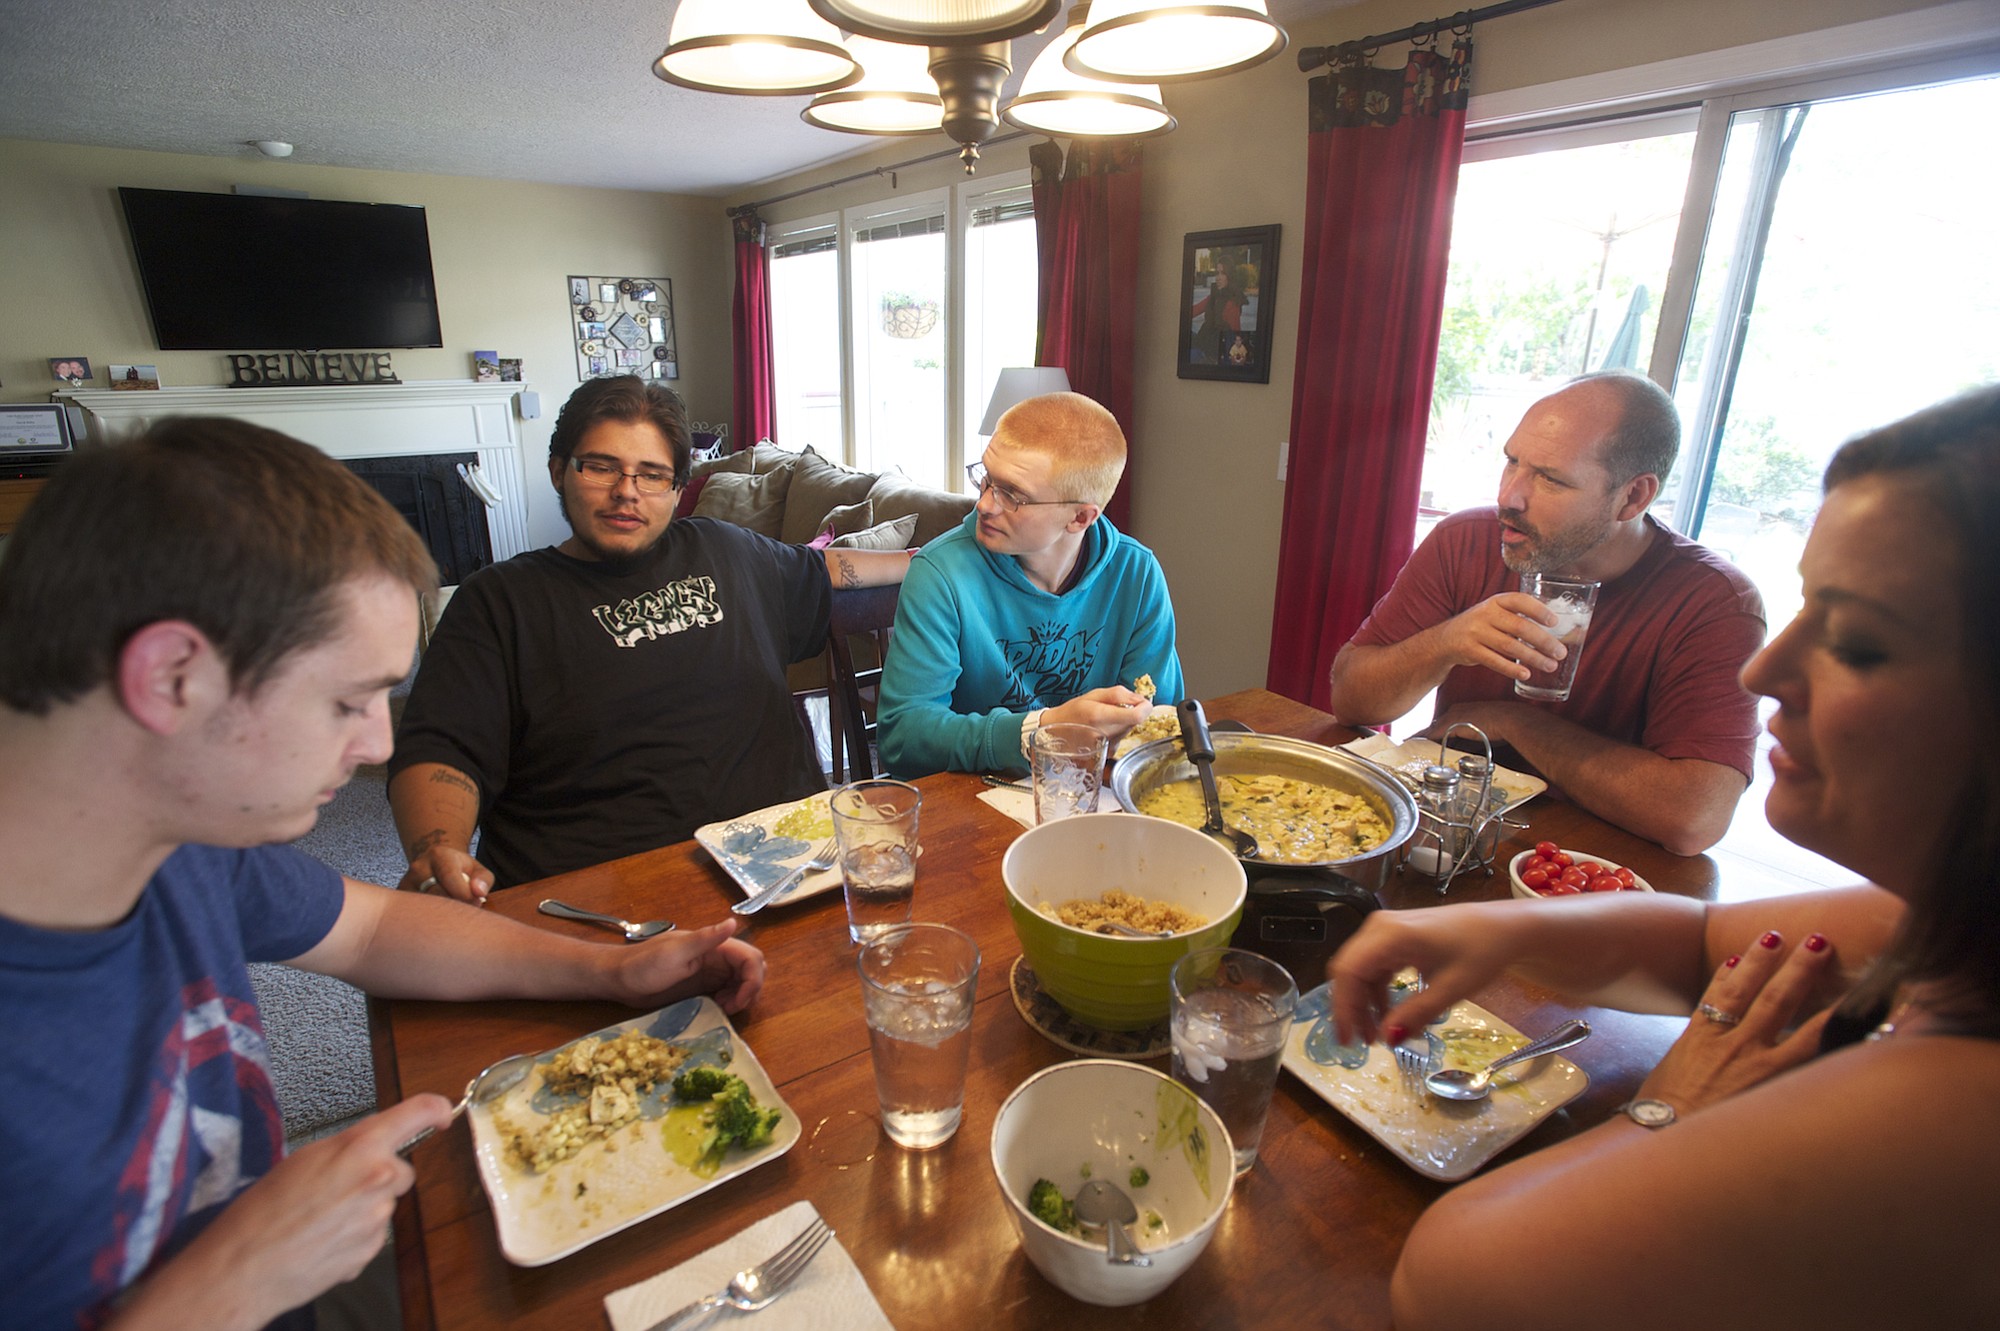 Jose Ramirez, 20, from second from left, and Tayler O'Bryant, 19, eat dinner with the Bilby family, David, Diana and Kent, on Tuesday.